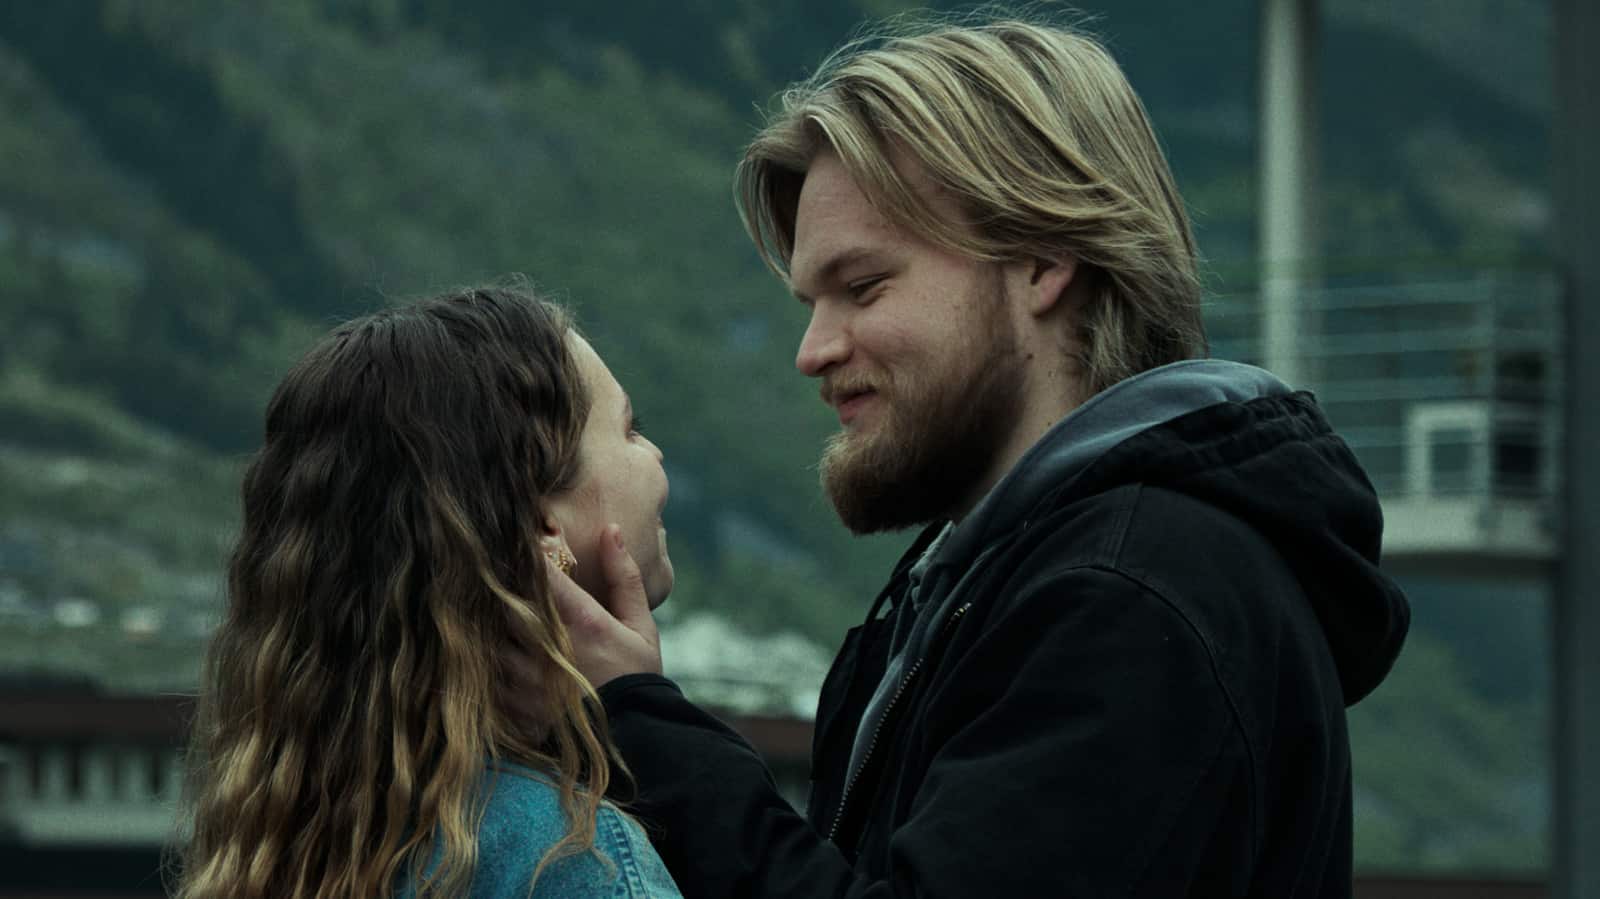 Billie Barker as Signy and David Stakston as Magne in Ragnarok (Credits: Netflix)